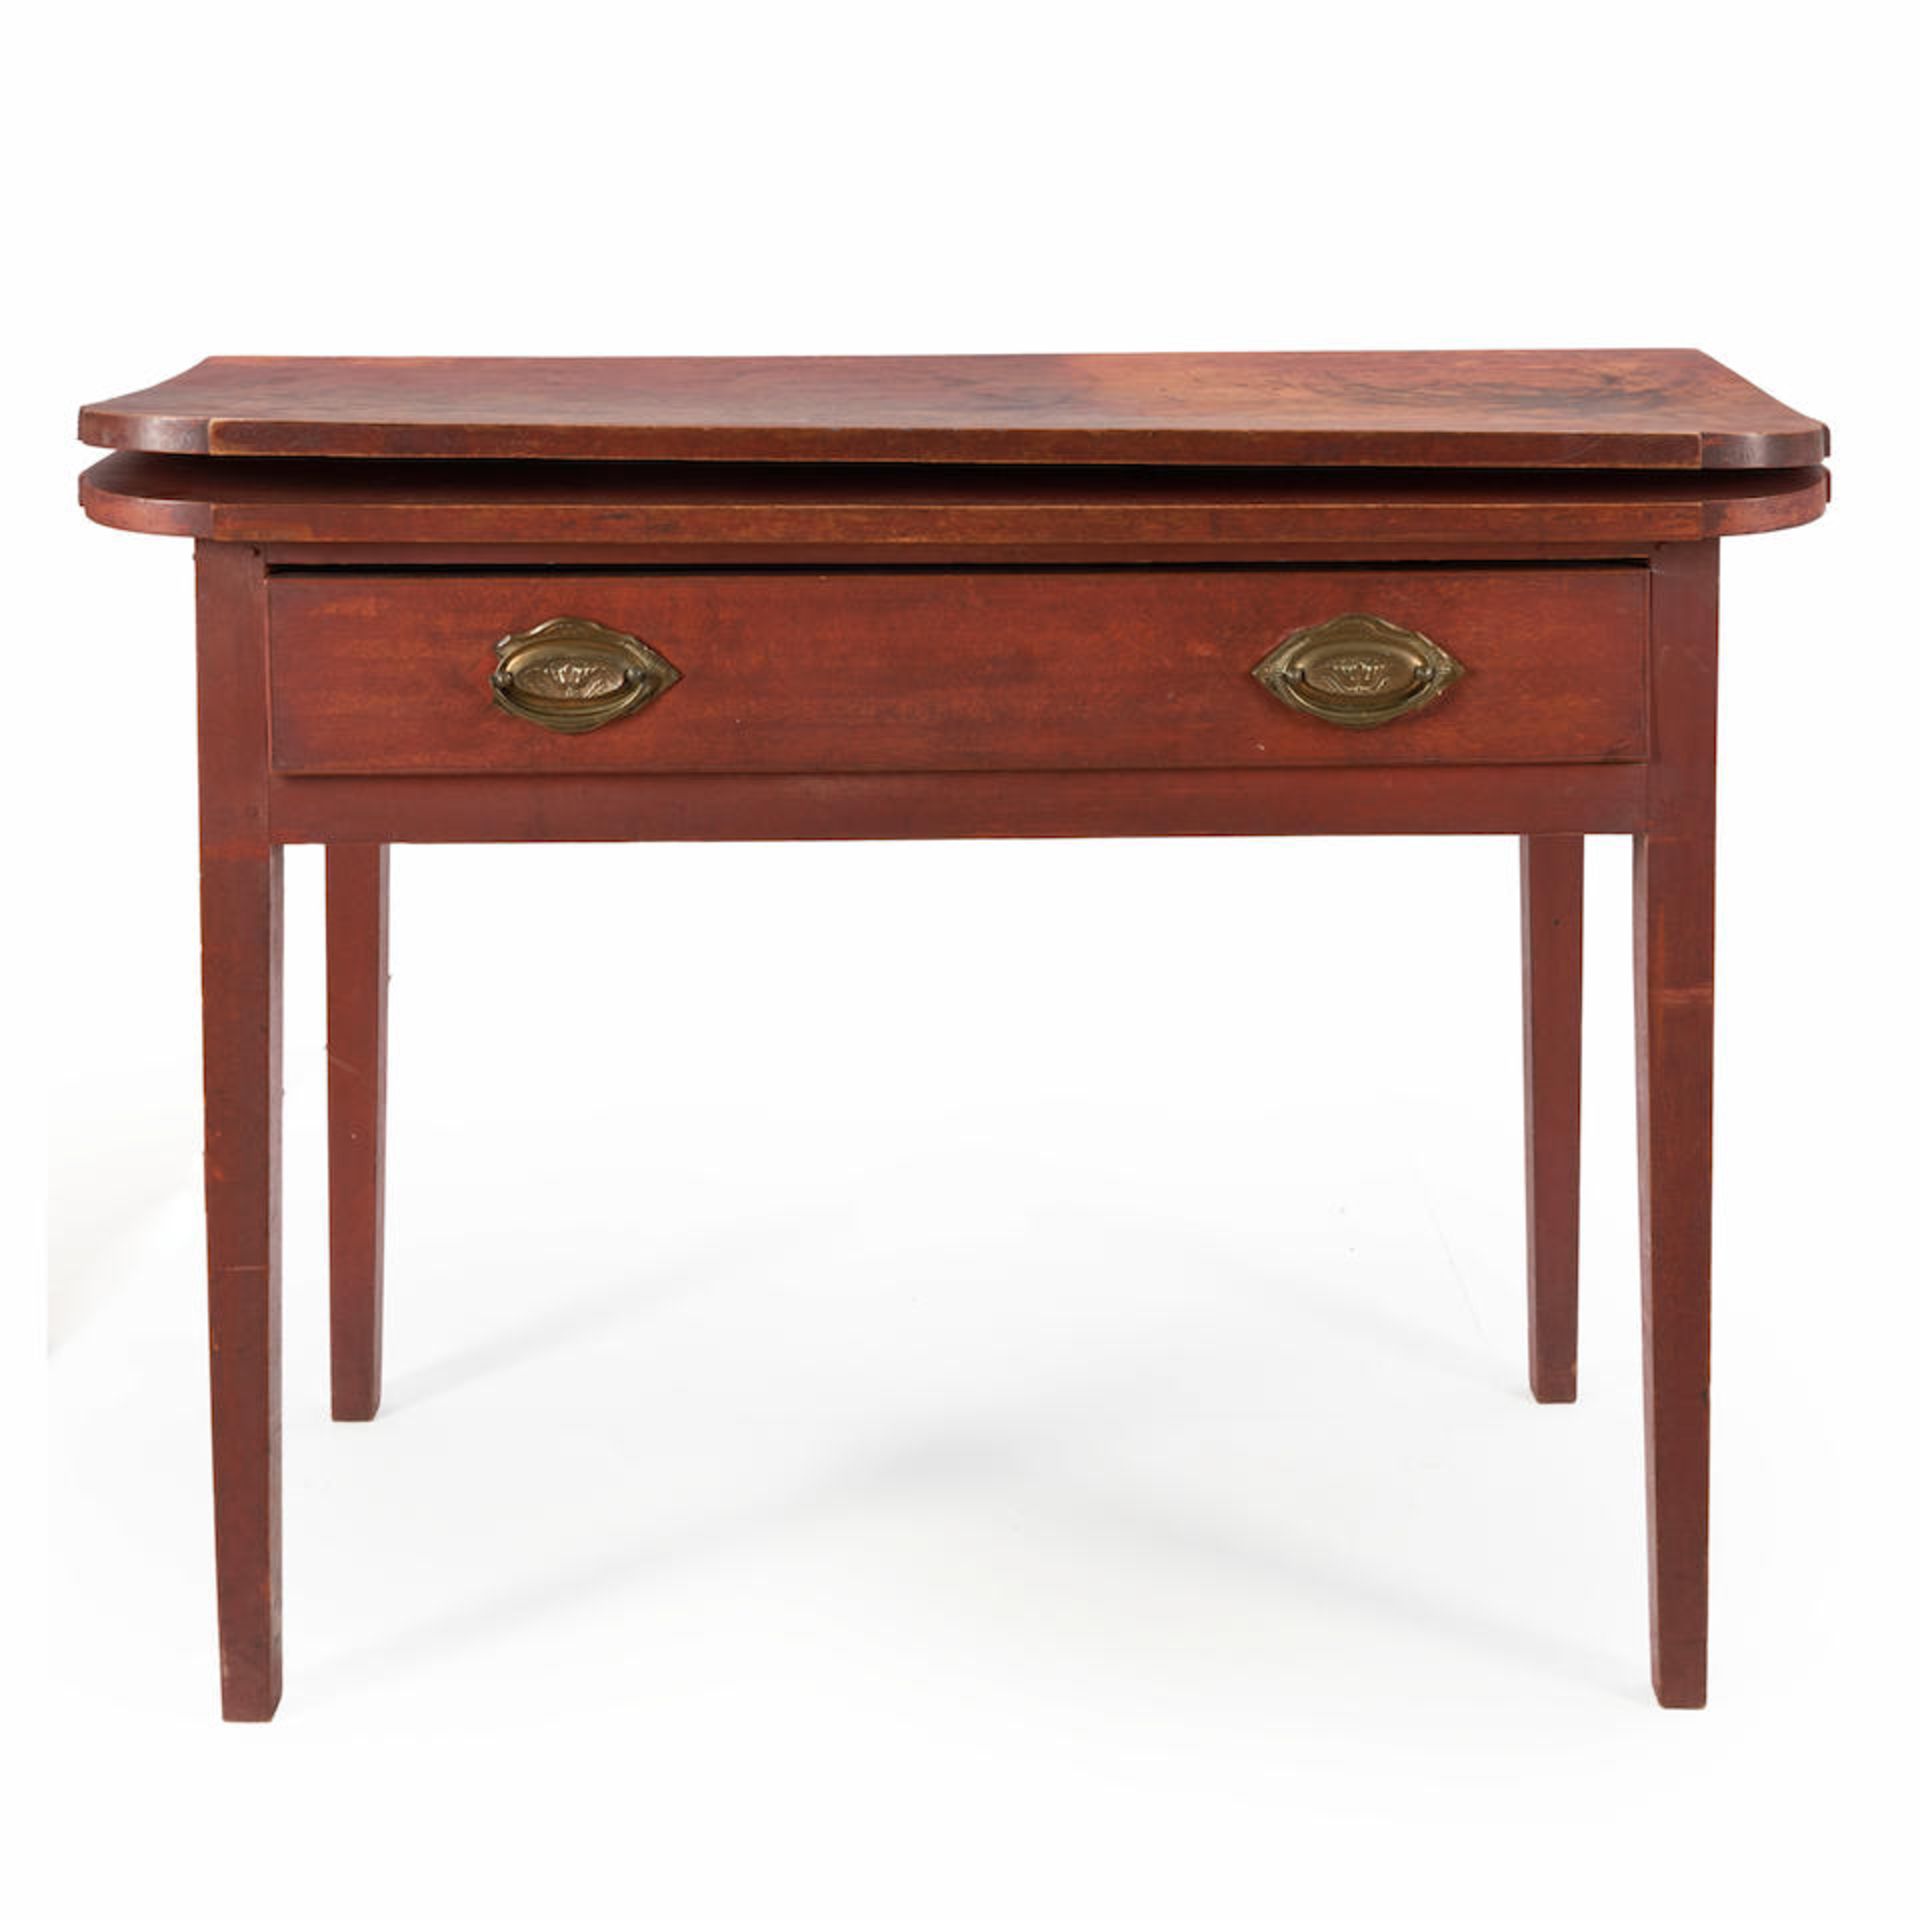 COUNTRY RED-PAINTED CARD TABLE - Image 3 of 4